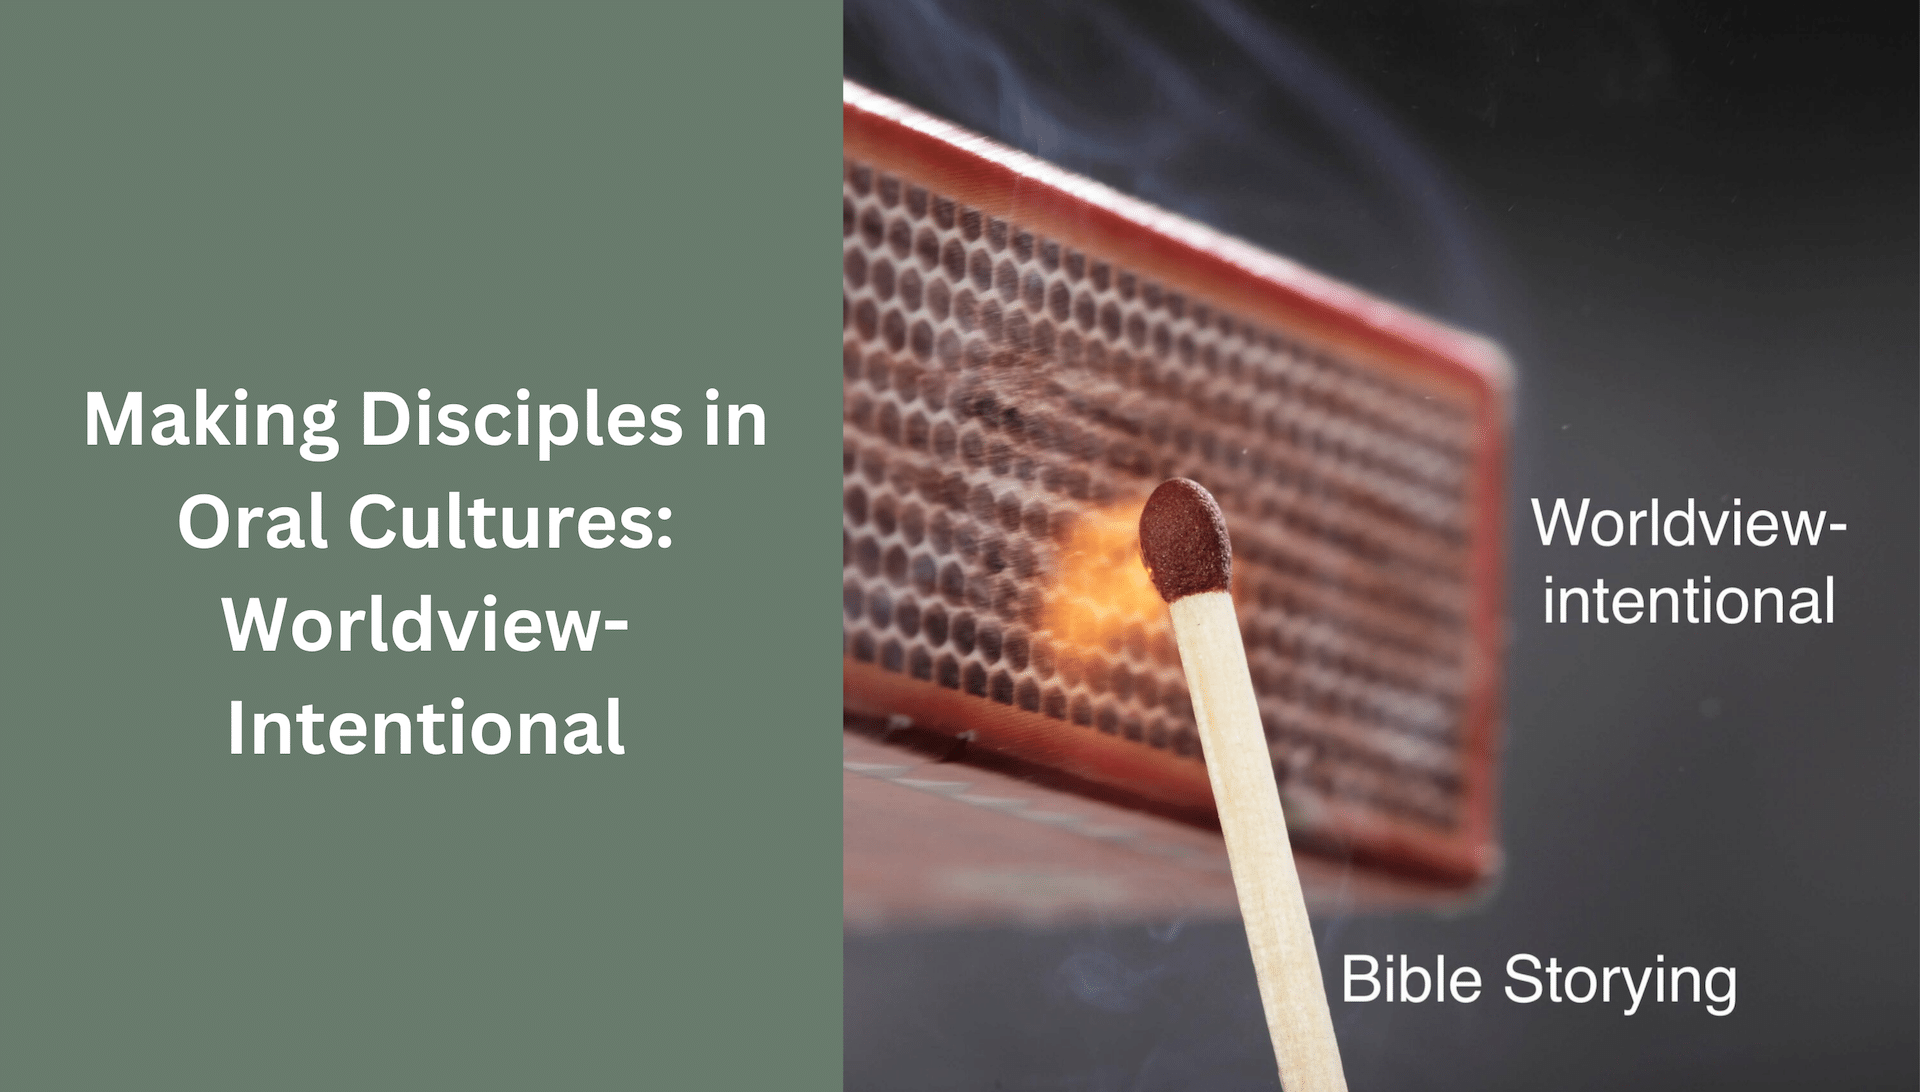 Making Disciples in Oral Cultures: Worldview-Intentional